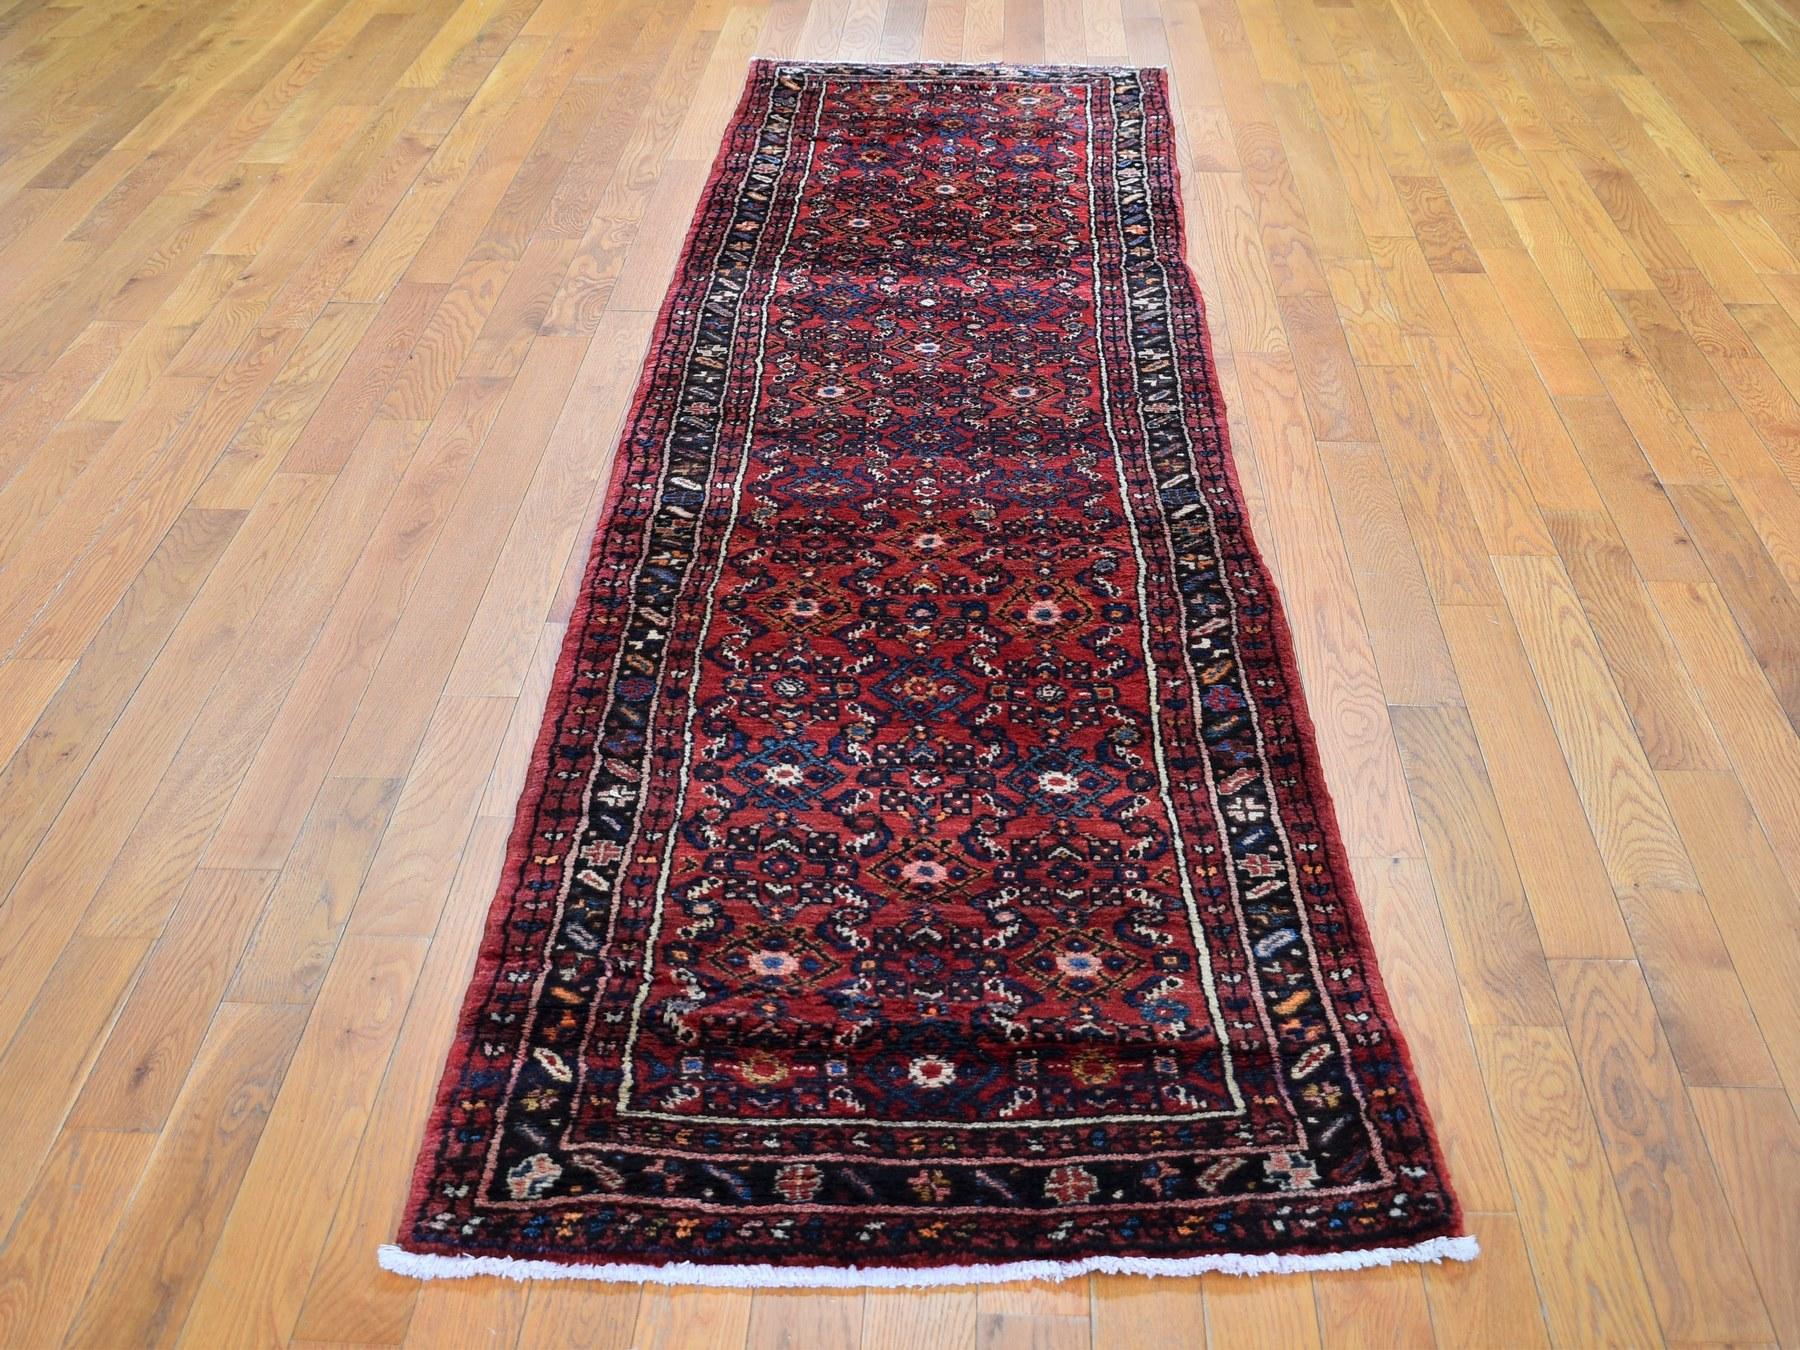 This fabulous hand knotted carpet has been created and designed for extra strength and durability. This rug has been handcrafted for weeks in the traditional method that is used to make rugs. This is truly a one-of-kind piece.

Exact rug size in